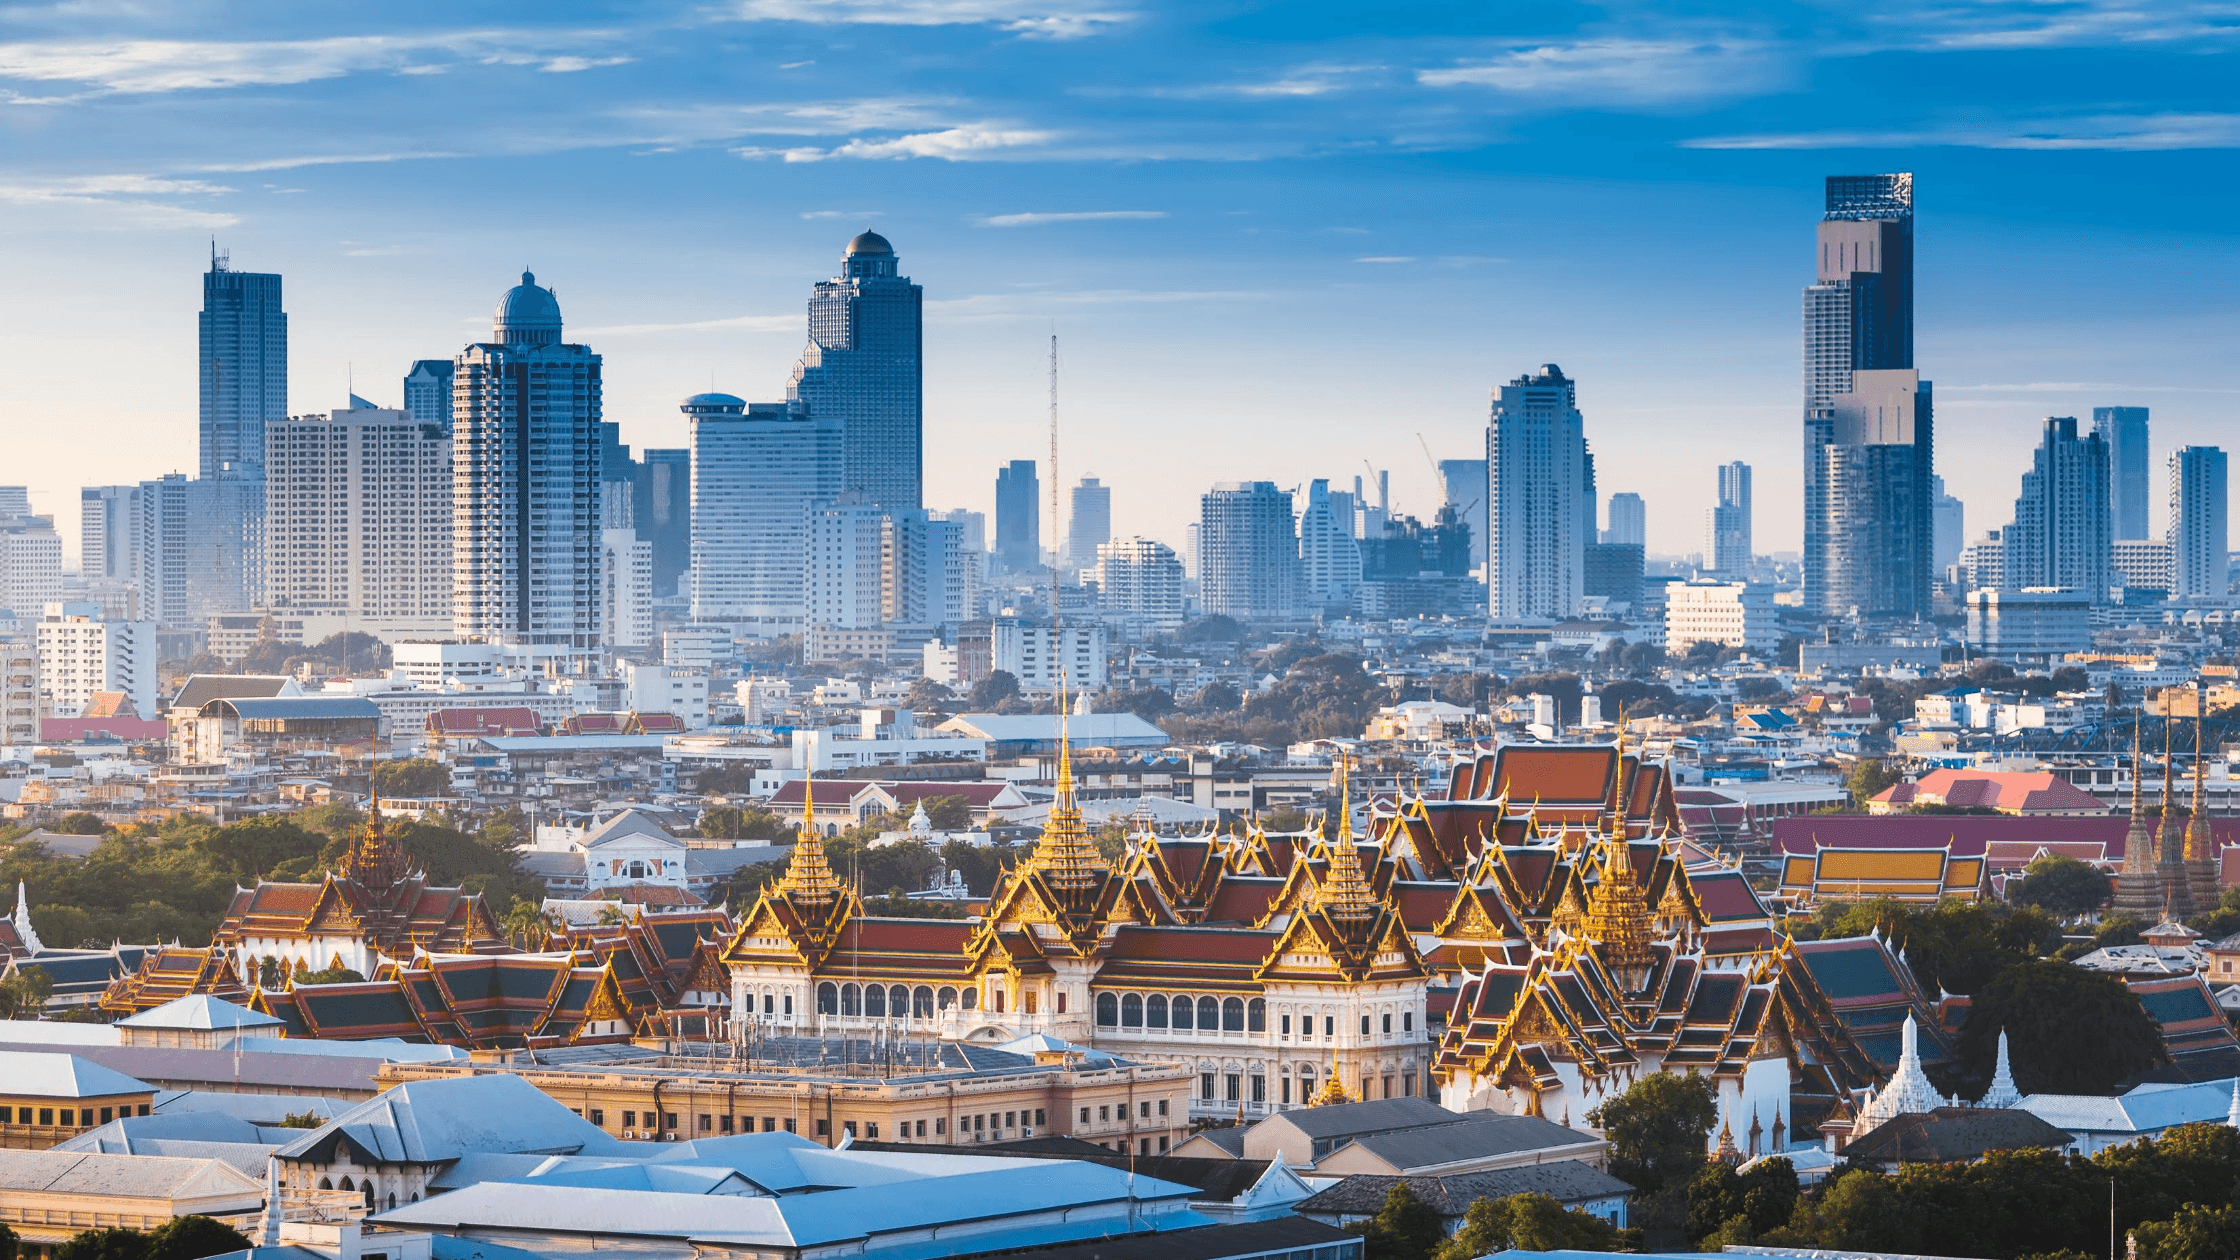 Bangkok, Thailand: Places to See, Eat, Drink and Shop